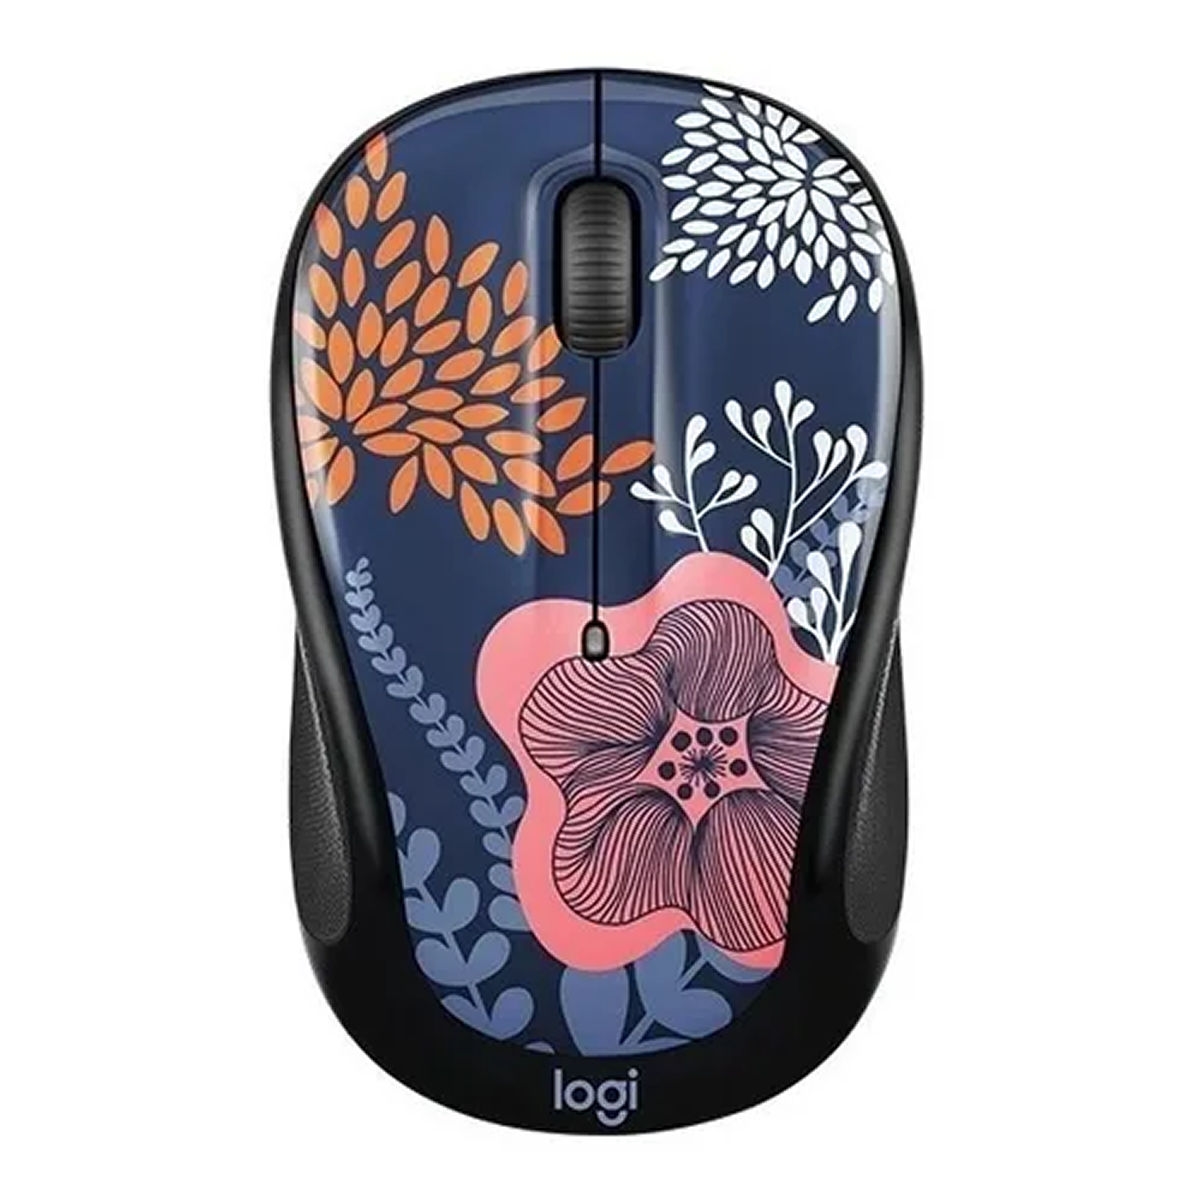 MOUSE LOGITECH WIR M317 LIMITED ED FOREST FLORAL 910-005756